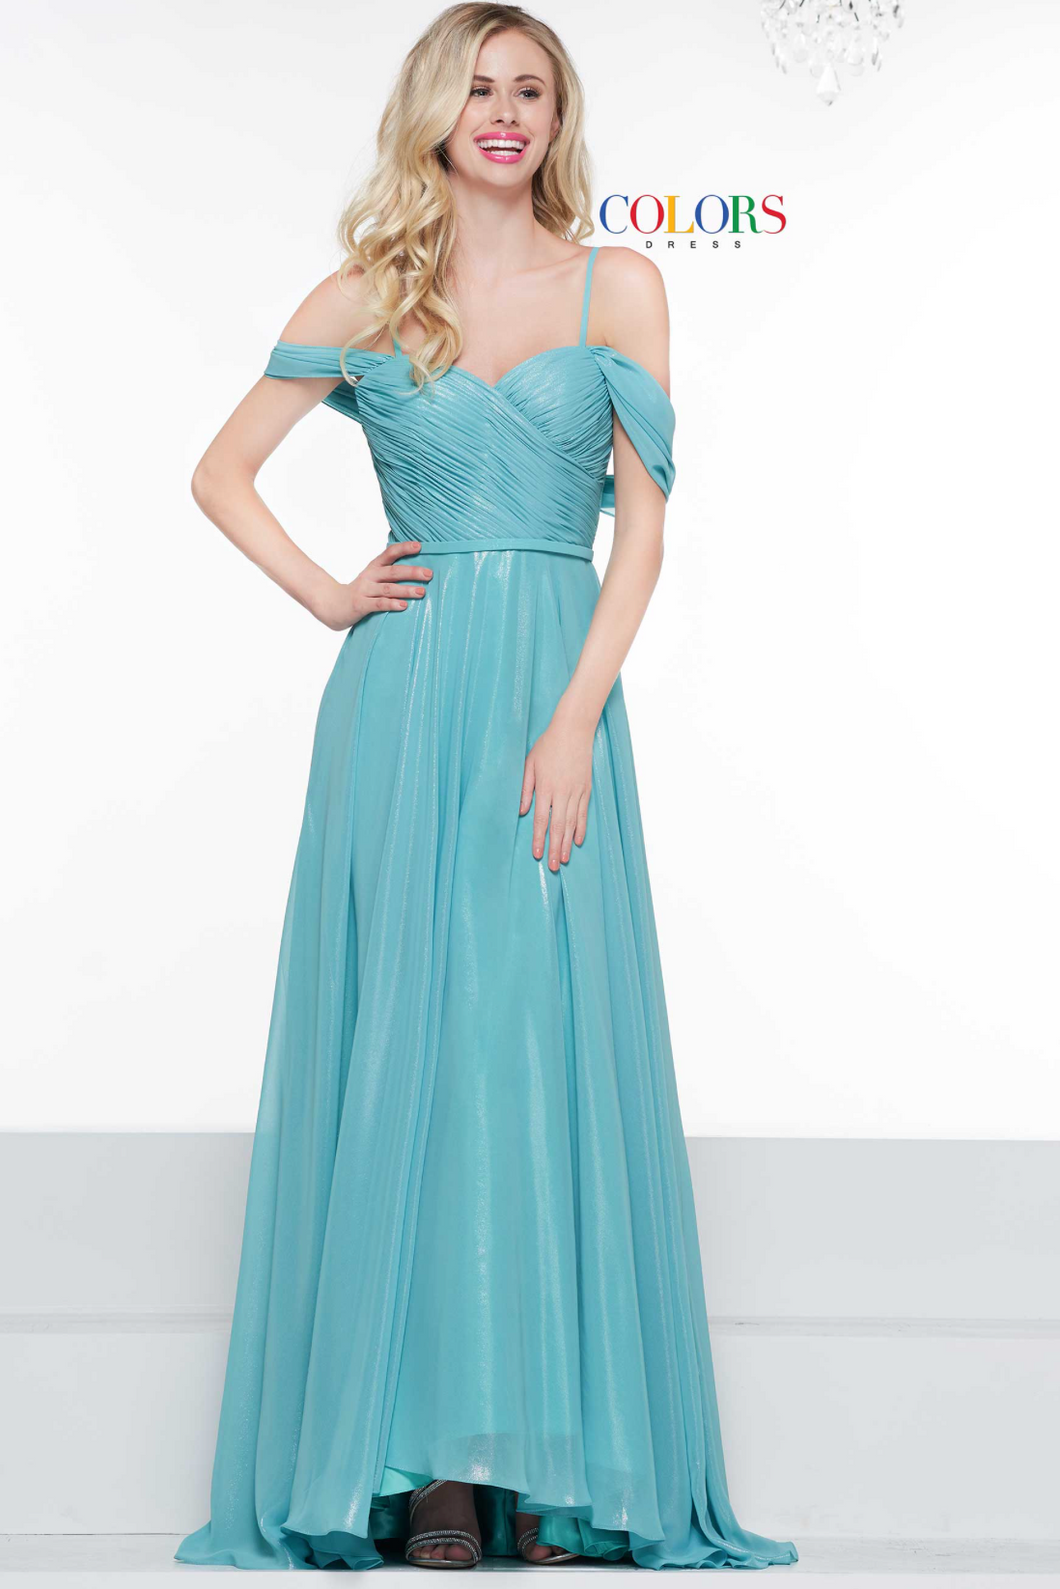 Colors Spring 2019 style 2125